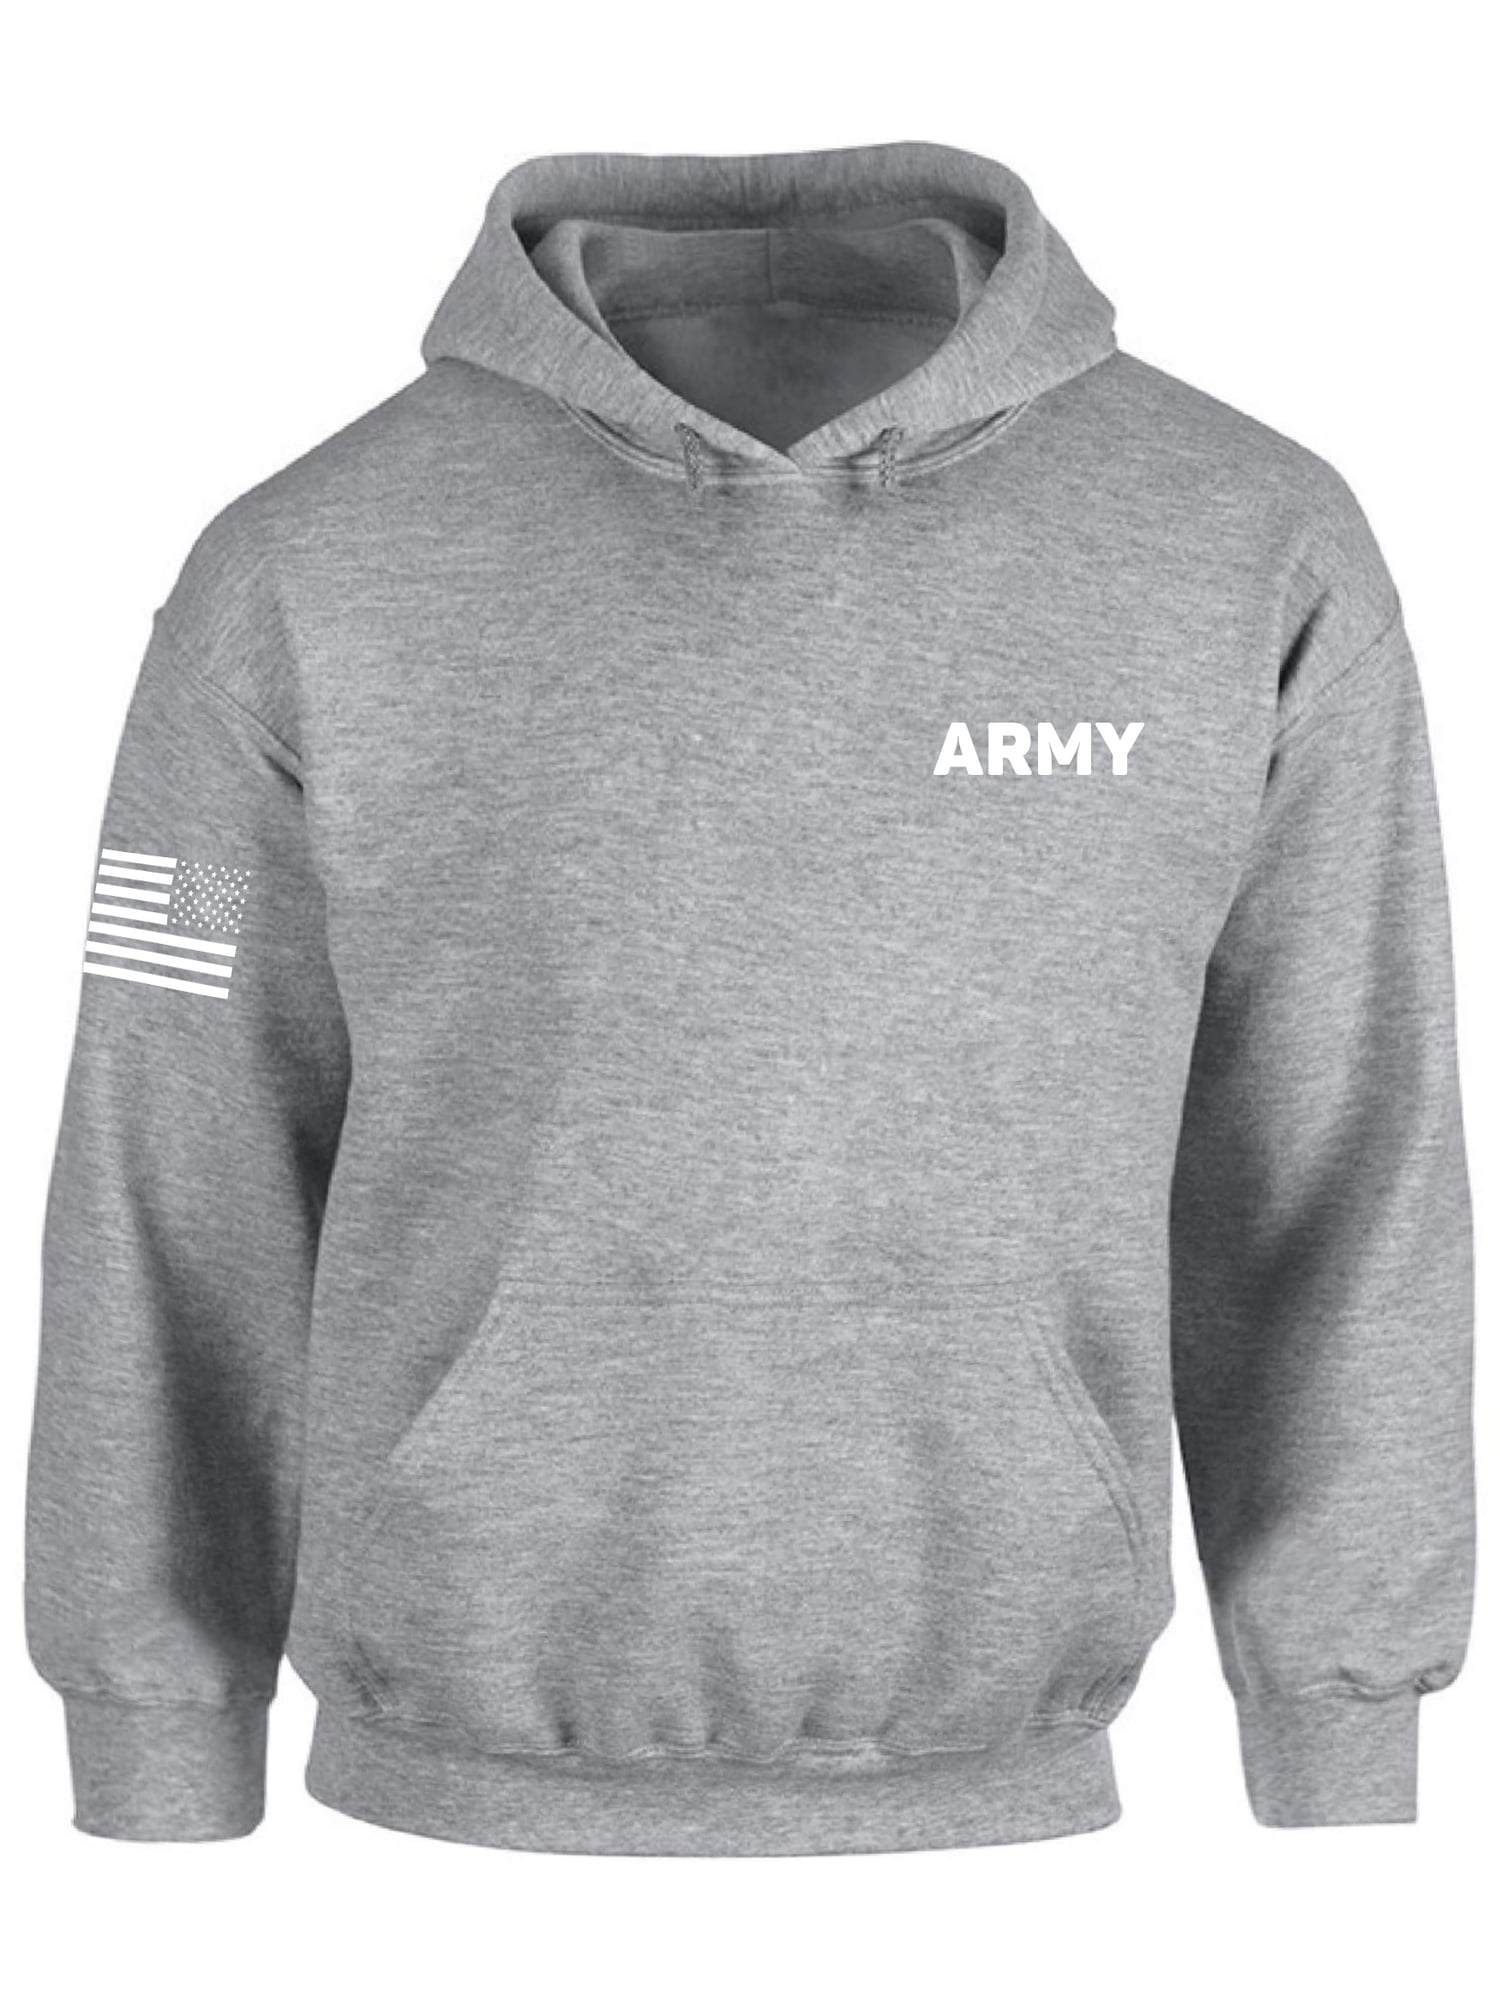 LQIAO Mens Hoodie 34th Infantry Division Loose-Fit Athletic Big Pockets Hooded Sweatshirt